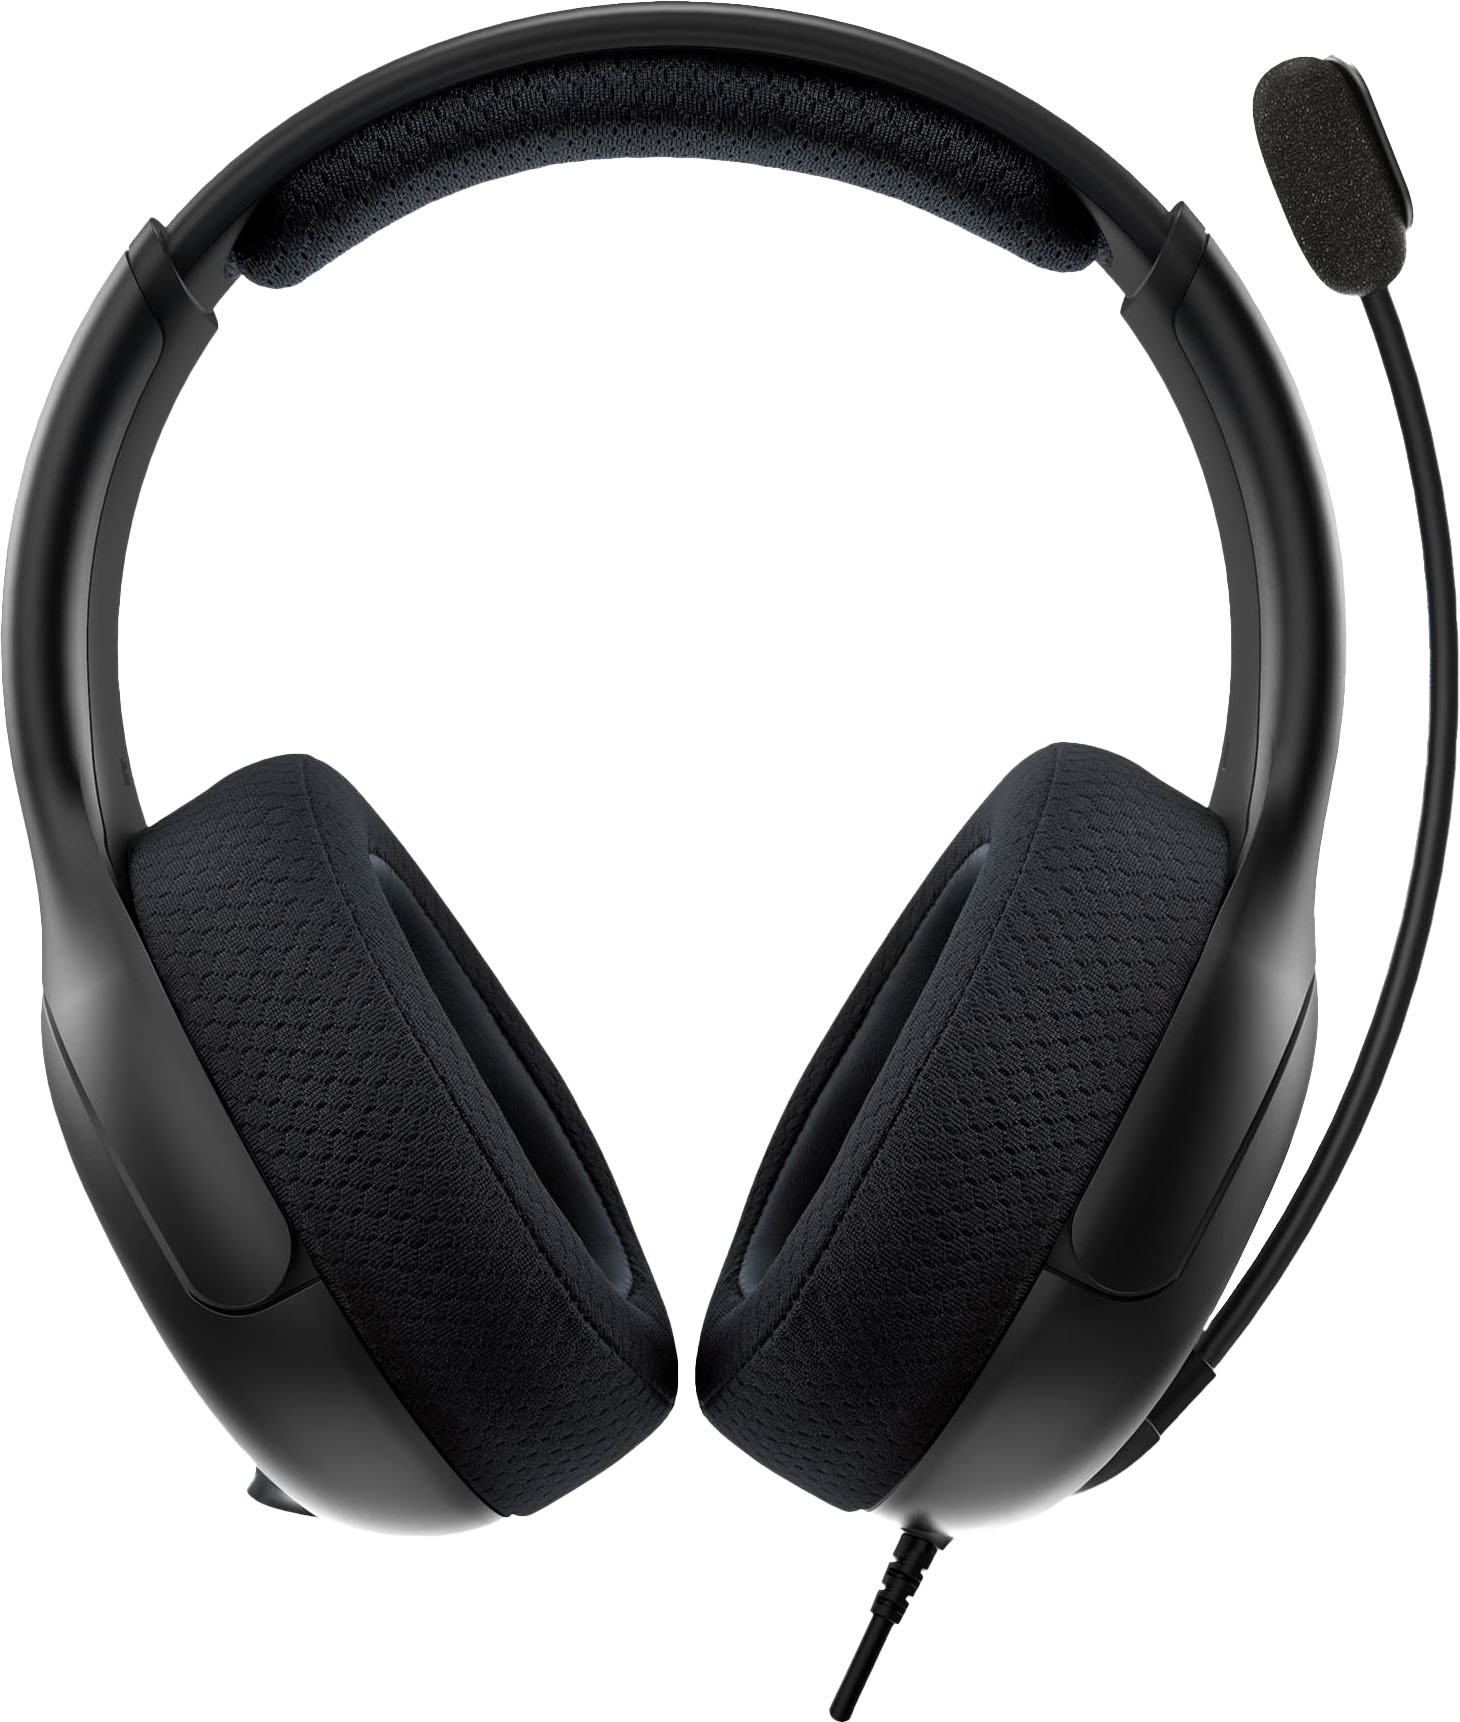 gaming headset brands xbox one